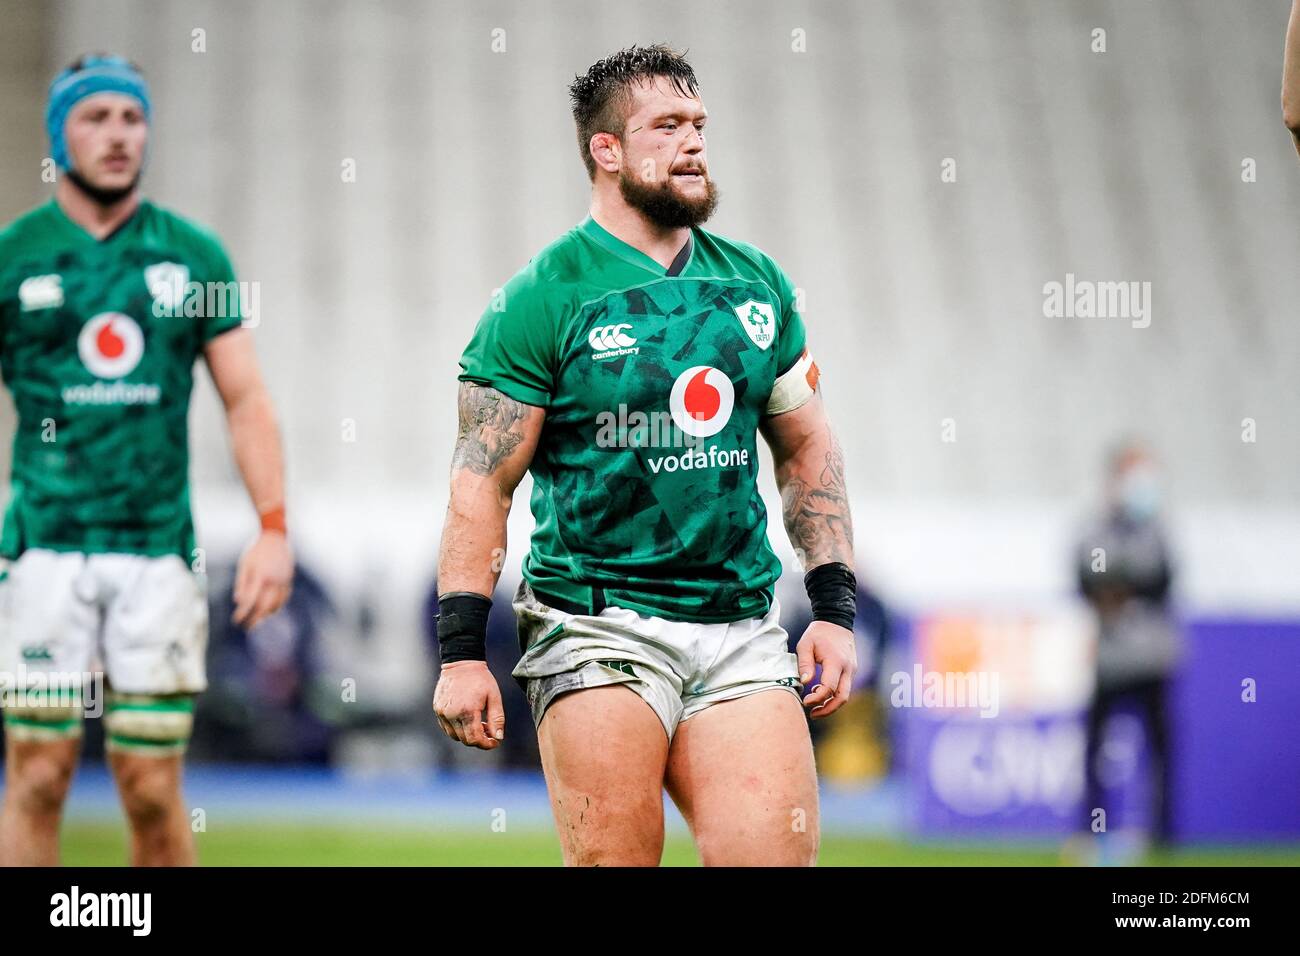 Andrew Porter (IRL) during the Rugby 6 Nations Tournament, France vs  Ireland (35-27) in Stade de France, St-Denis, France, on October 31, 2020.  Photo by Julien Poupart/ABACAPRESS.COM Stock Photo - Alamy